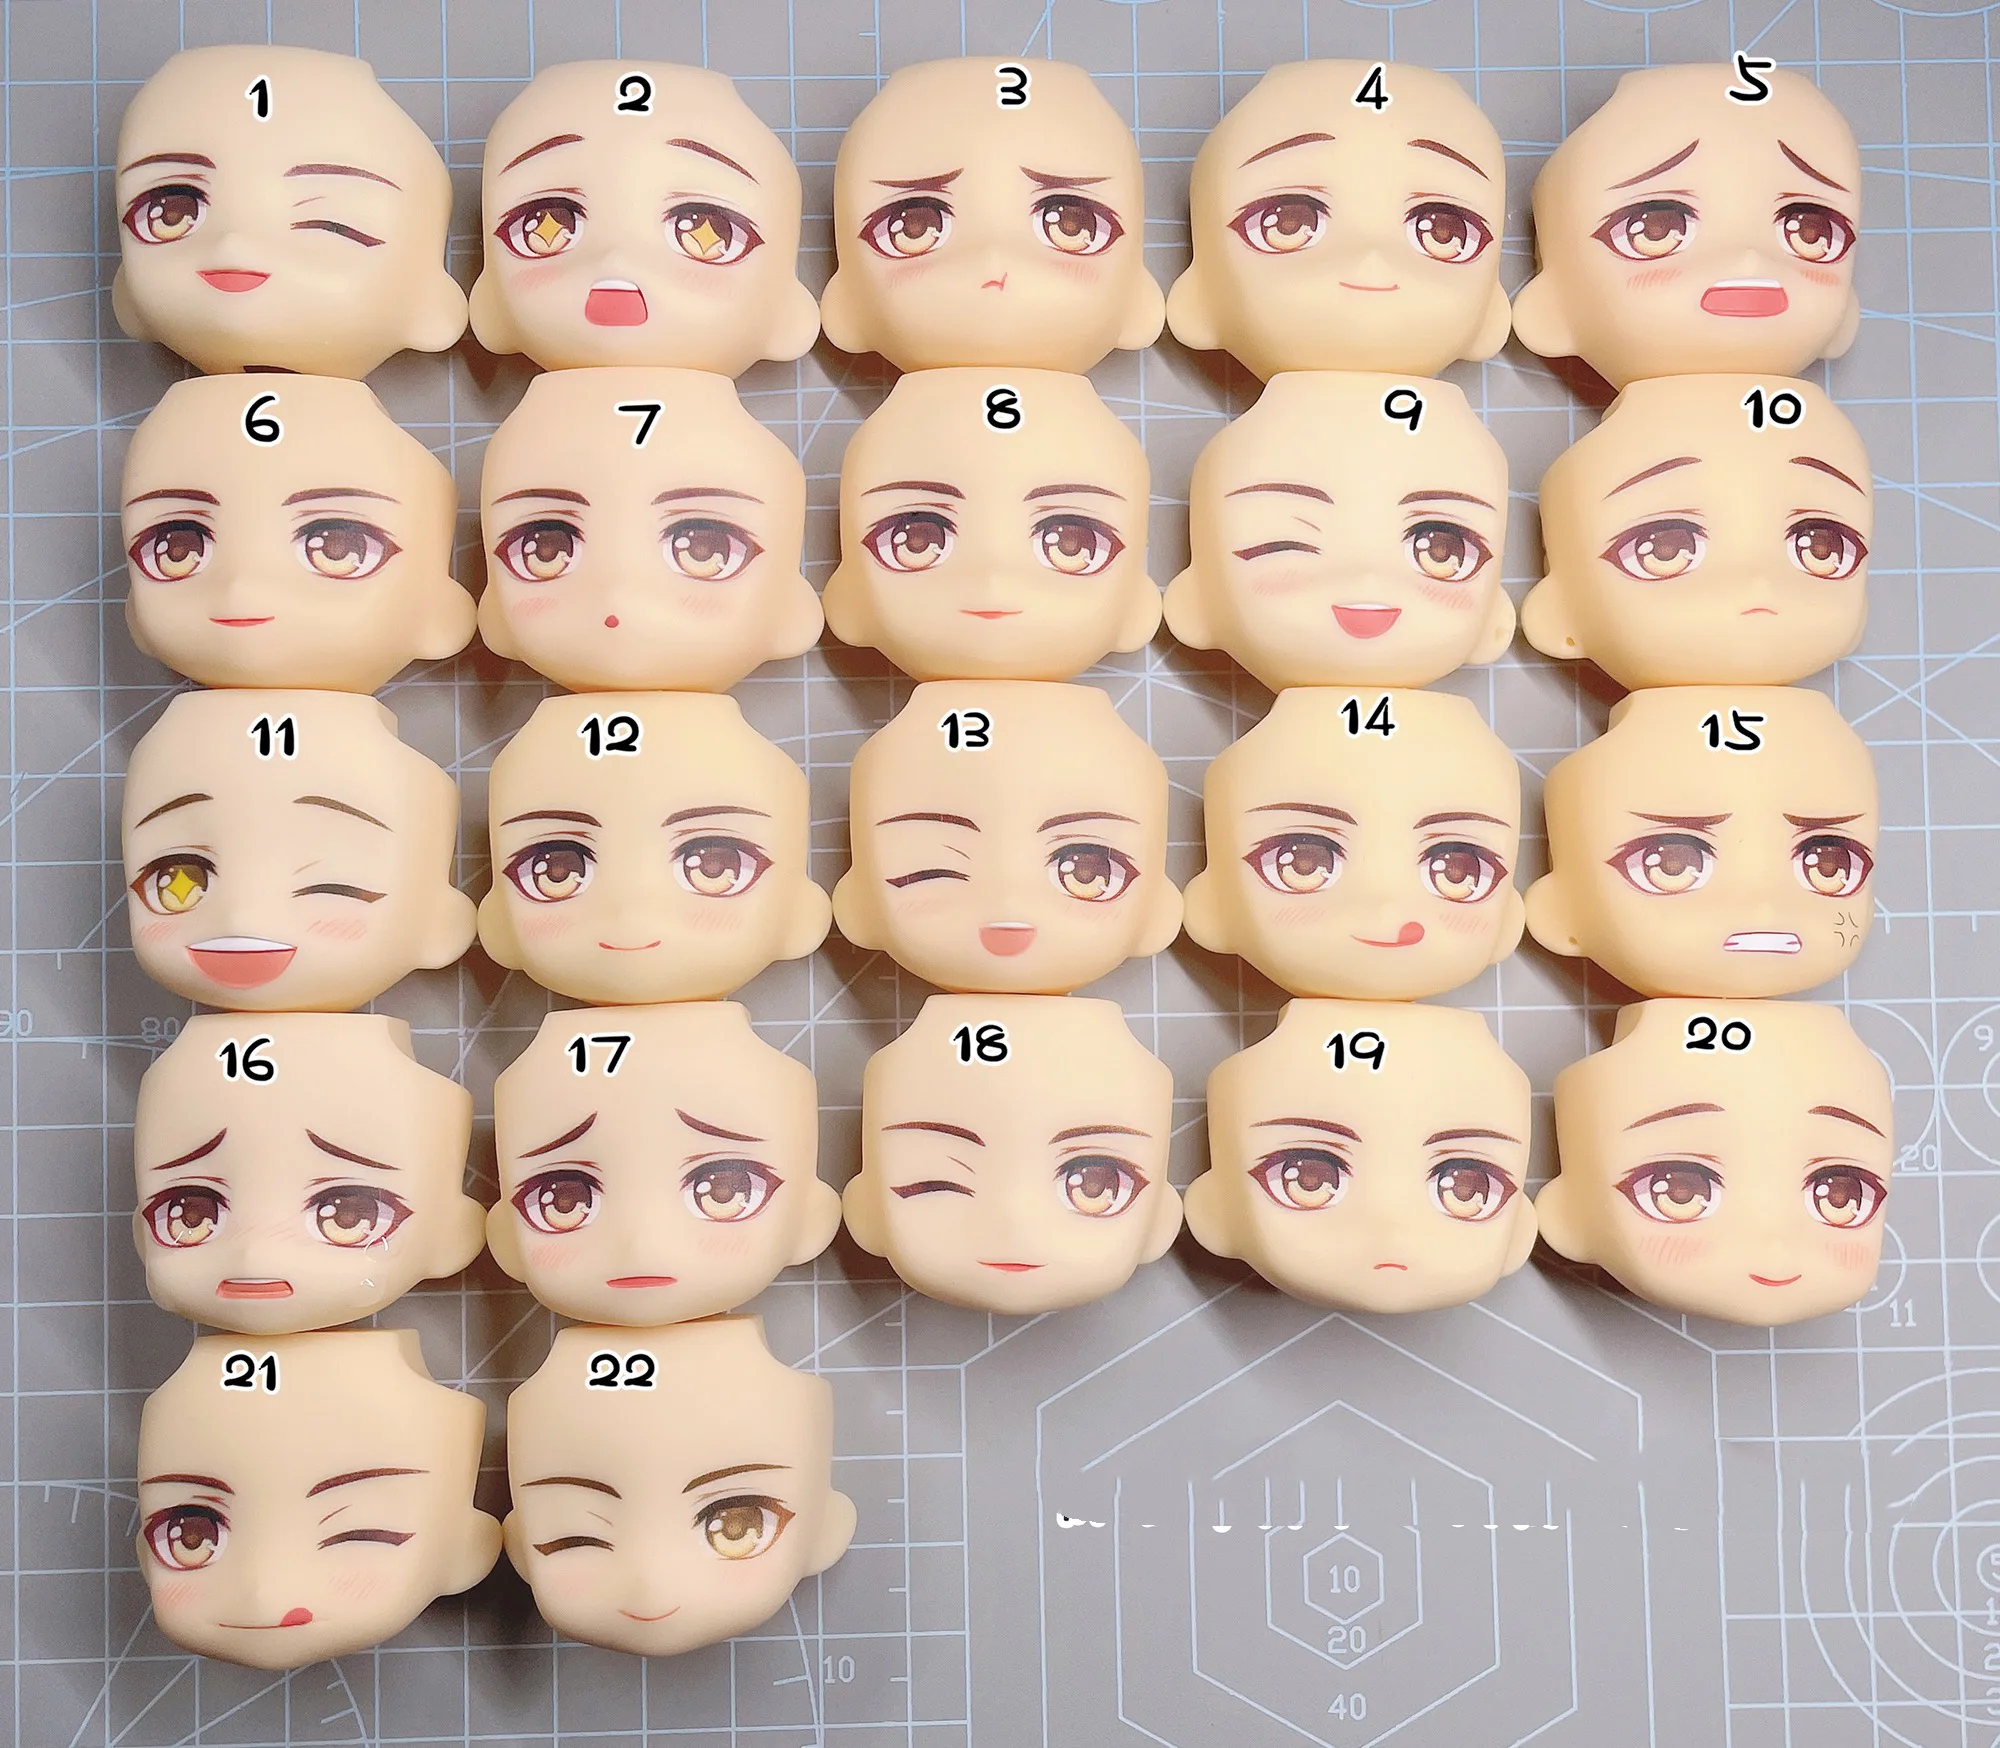 GSC Clay Man Face Mr Love: Queen's Choice Water Sticker Faceplate Ob11 Doll Accessories 20 cm red strawberry and love for happiness every day choice what you like